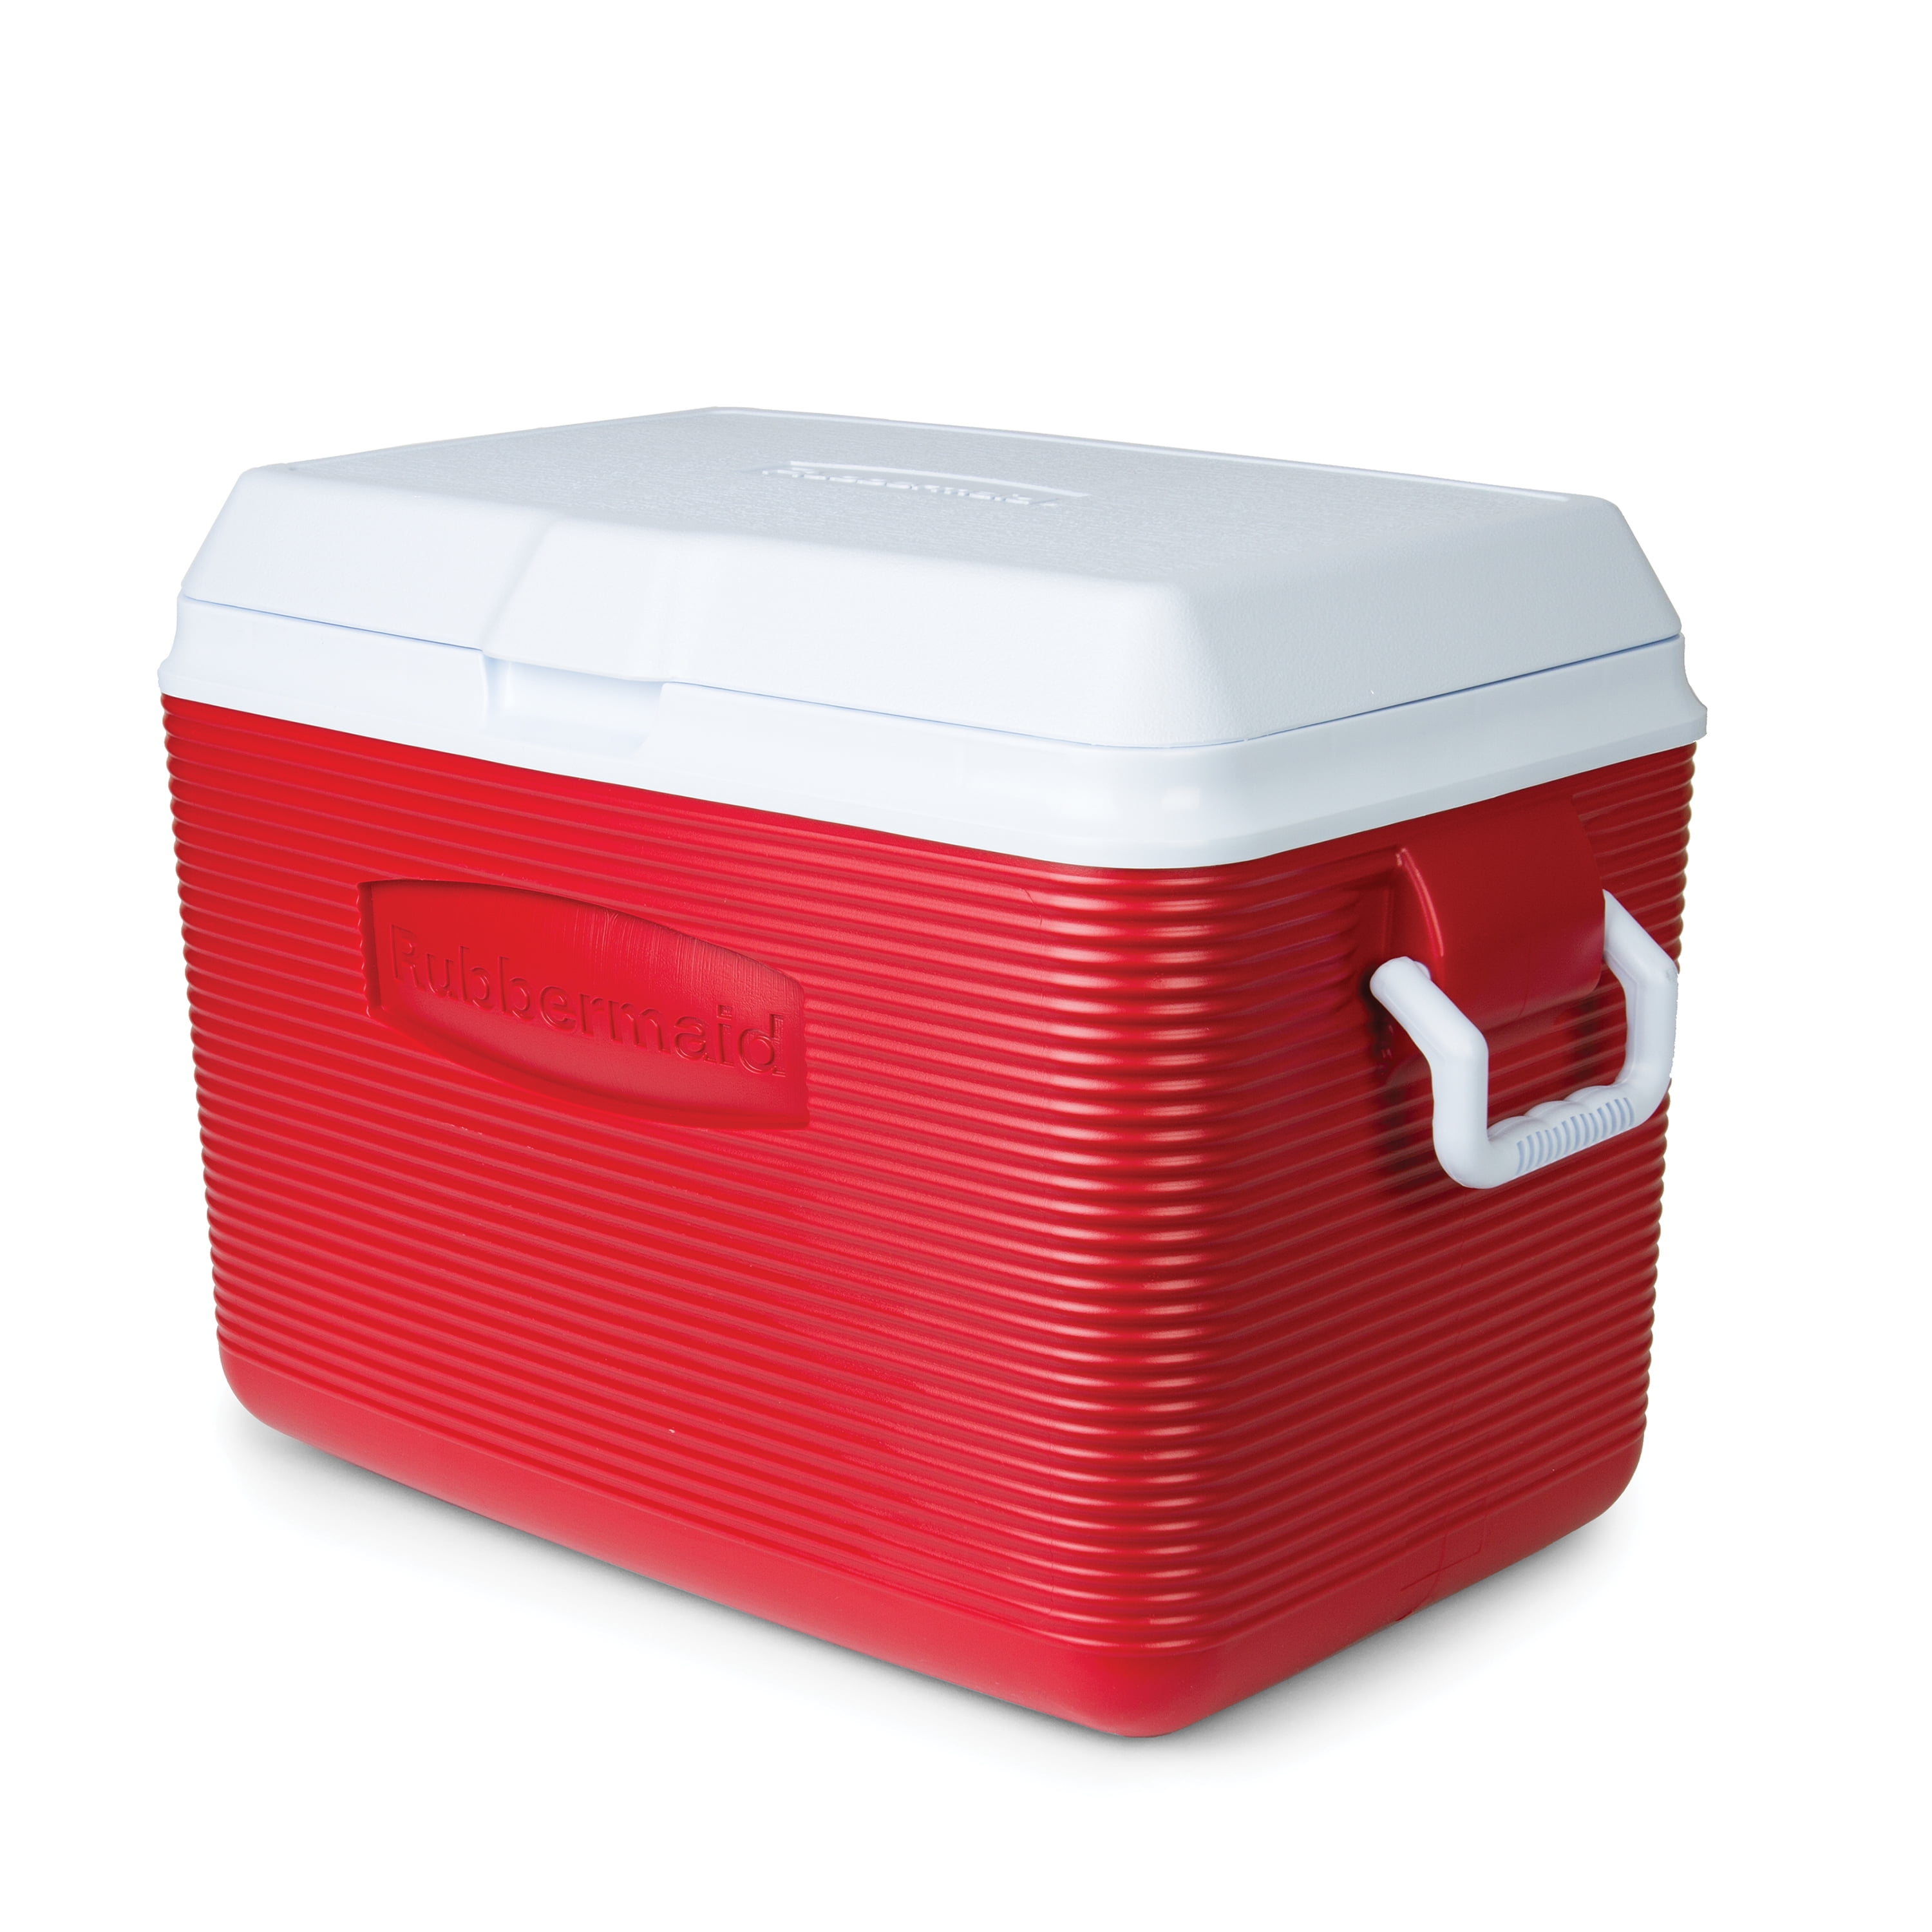 Rubbermaid Victory 48 Quart Hard Sided Cooler, Red